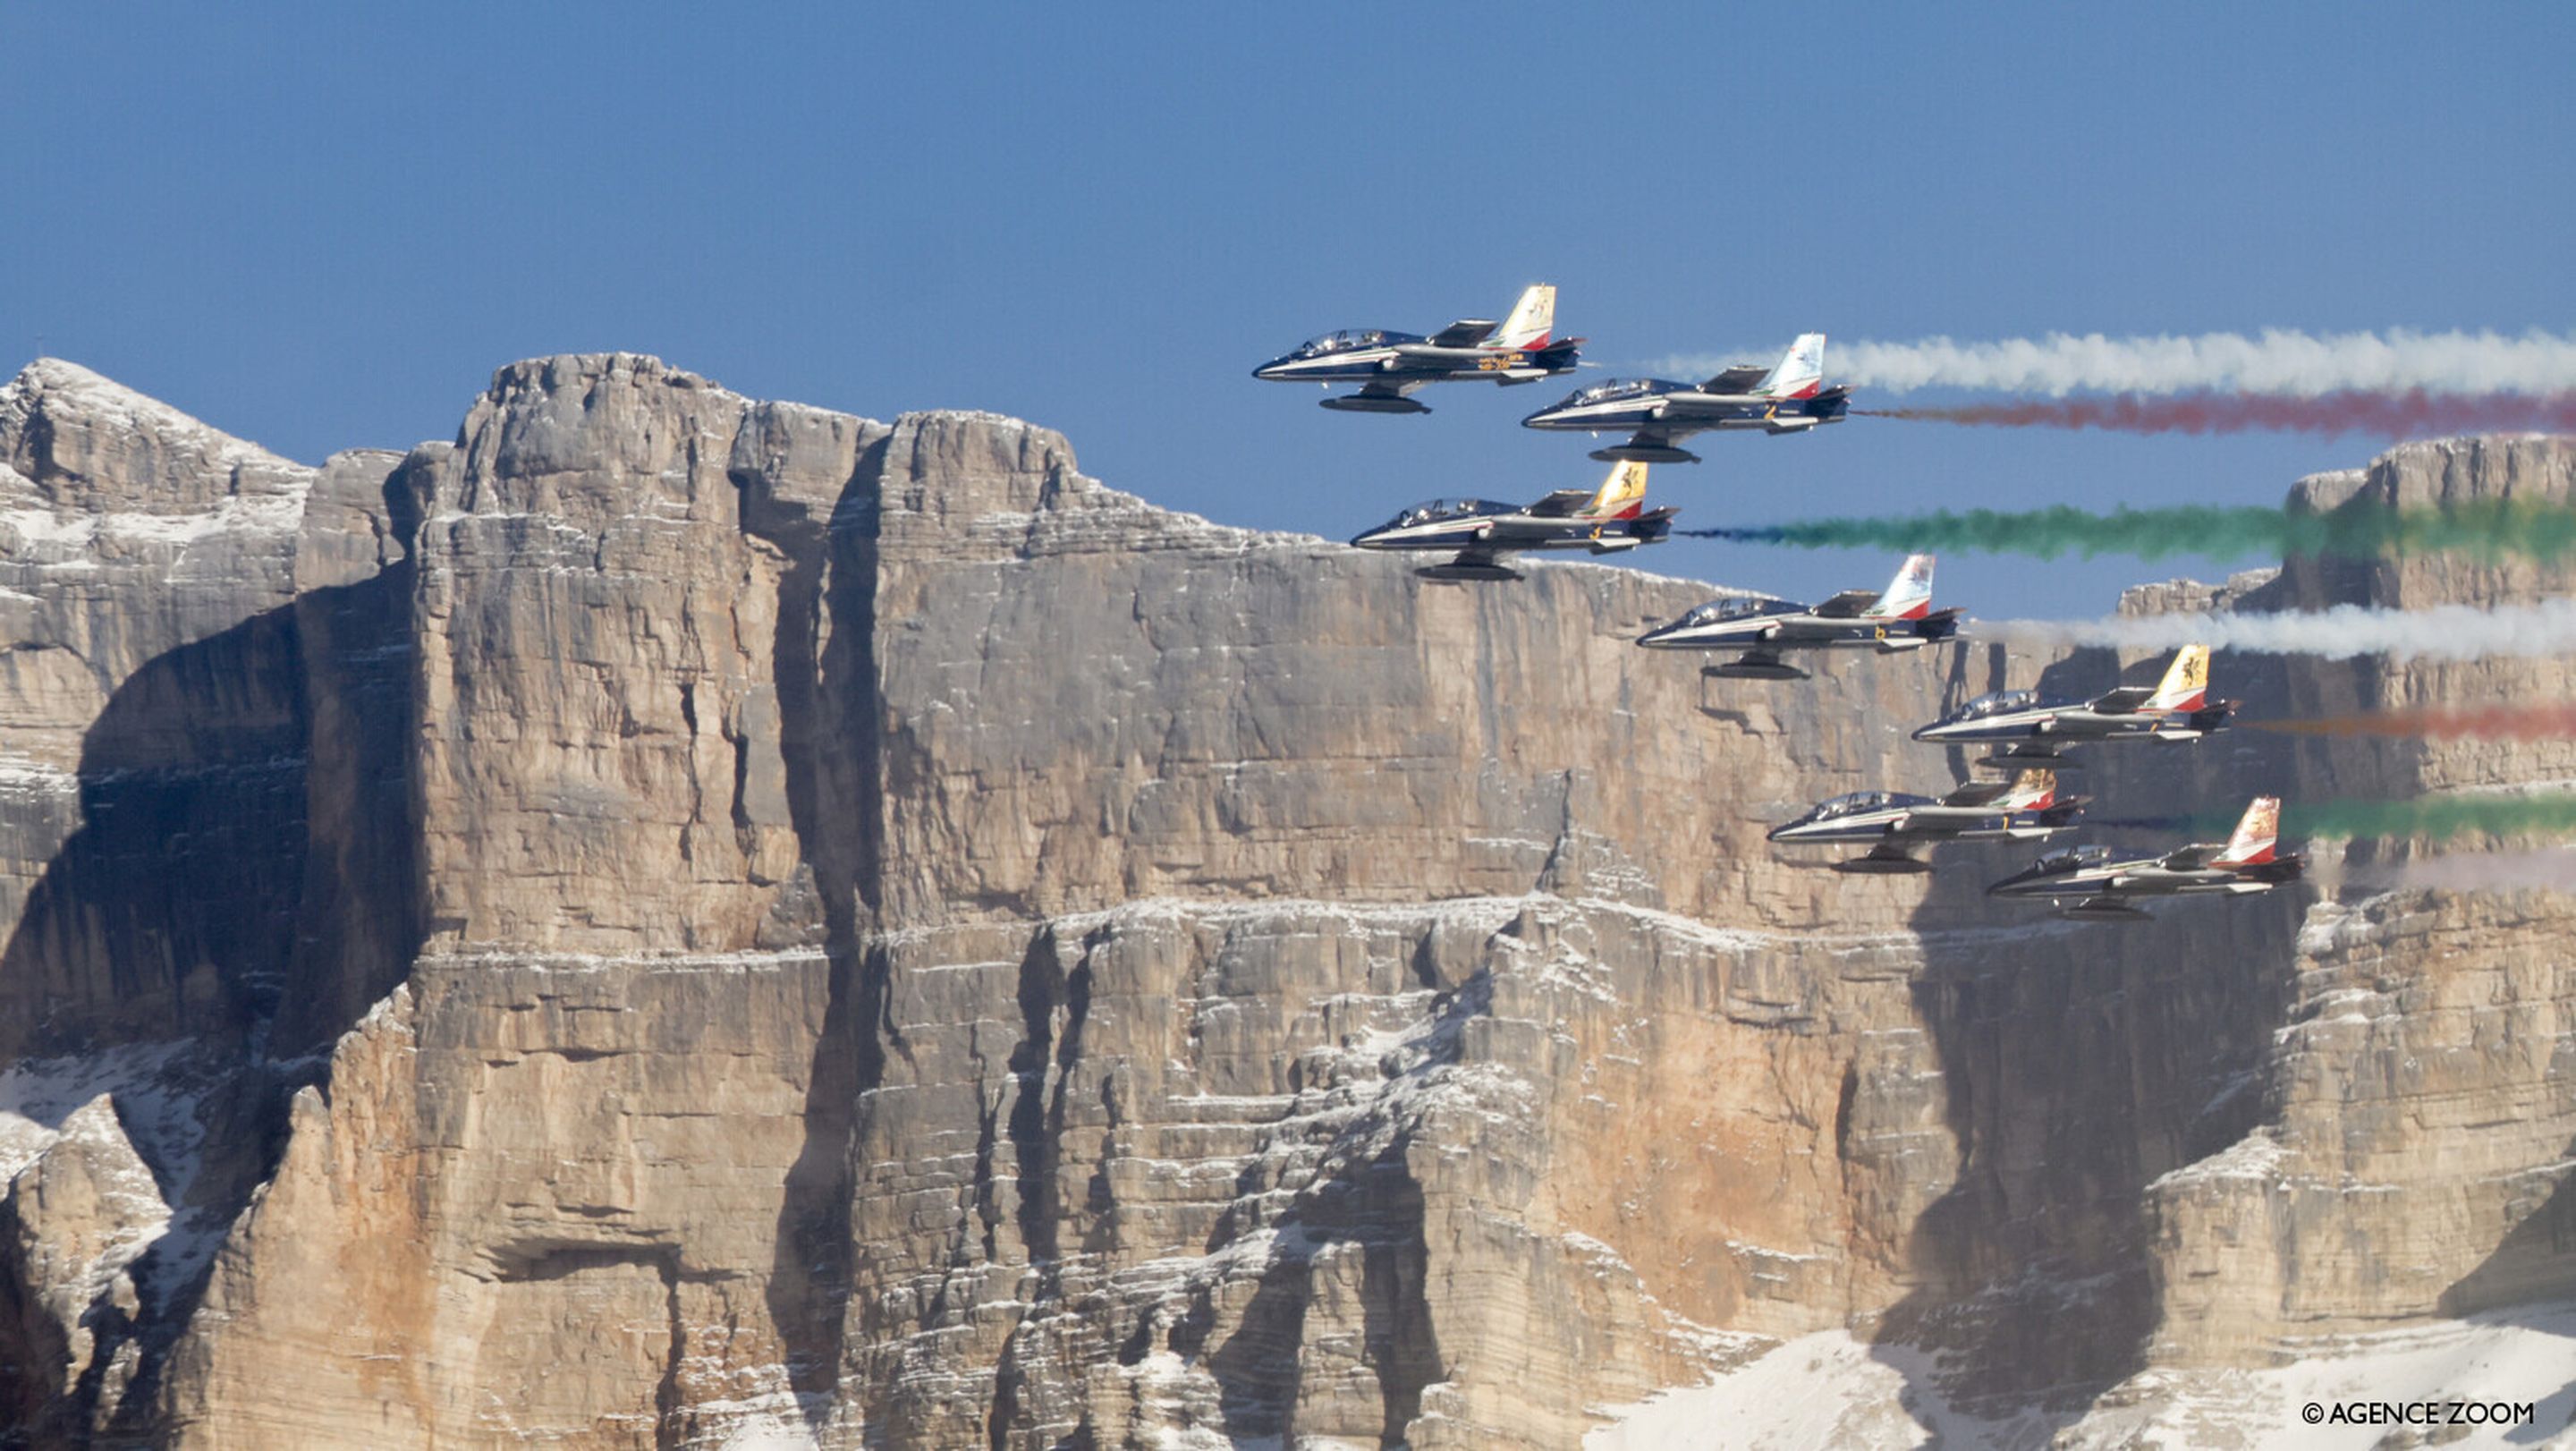 The Italian Frecce Tricolori put on a show for ski racing fans in the Dolomites (Agence Zoom)